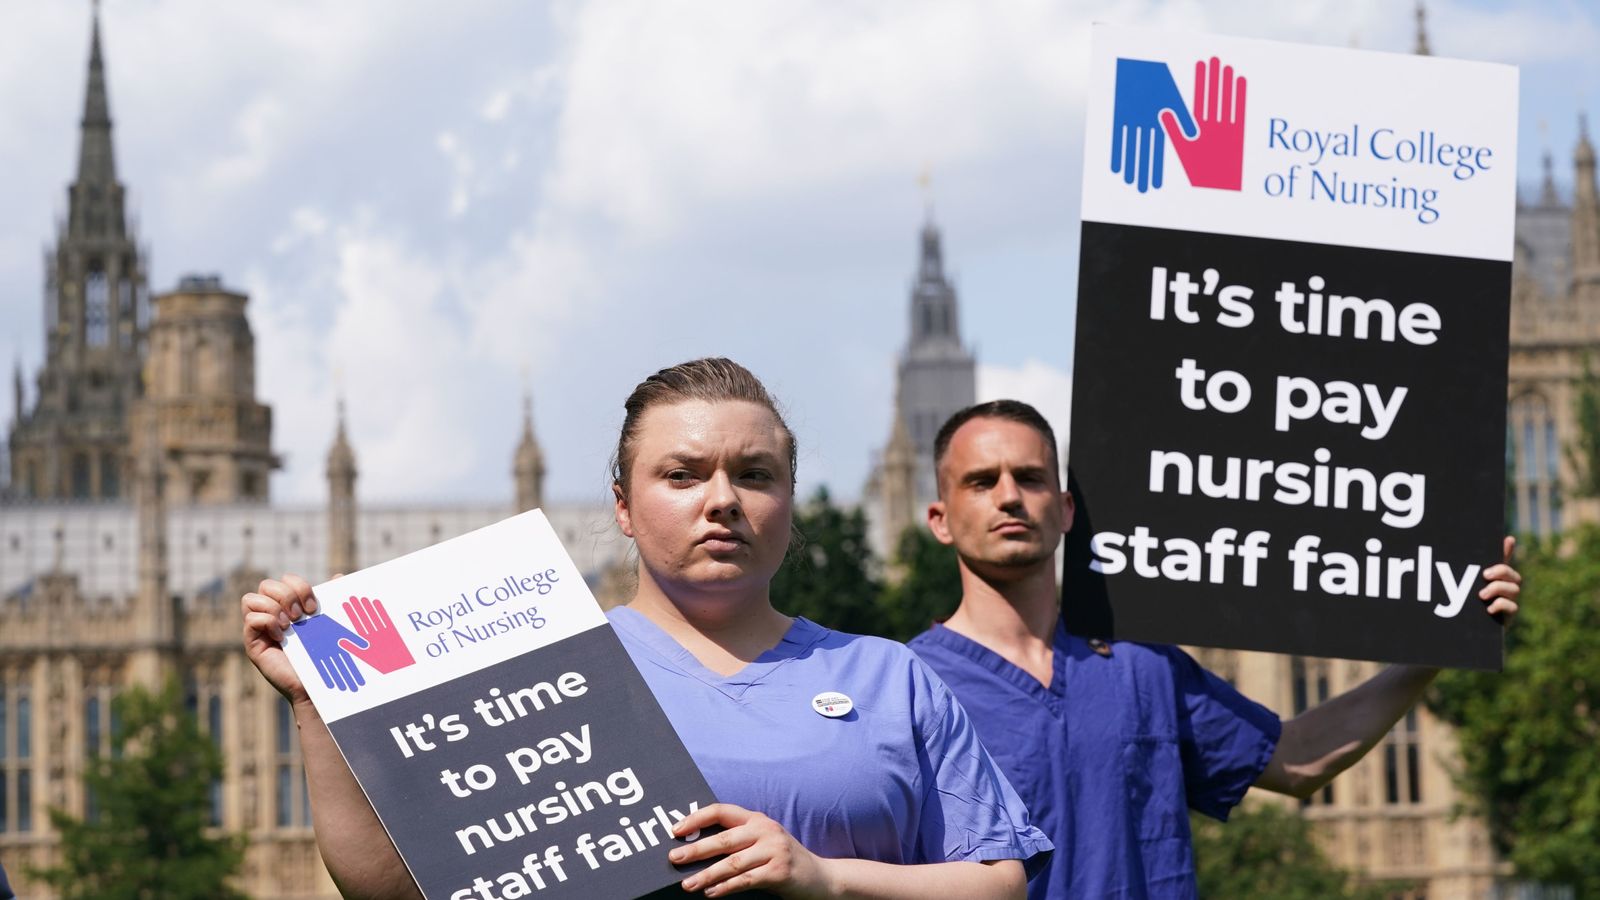 Nurses set to strike in first ever national action - as patients braced for disruption